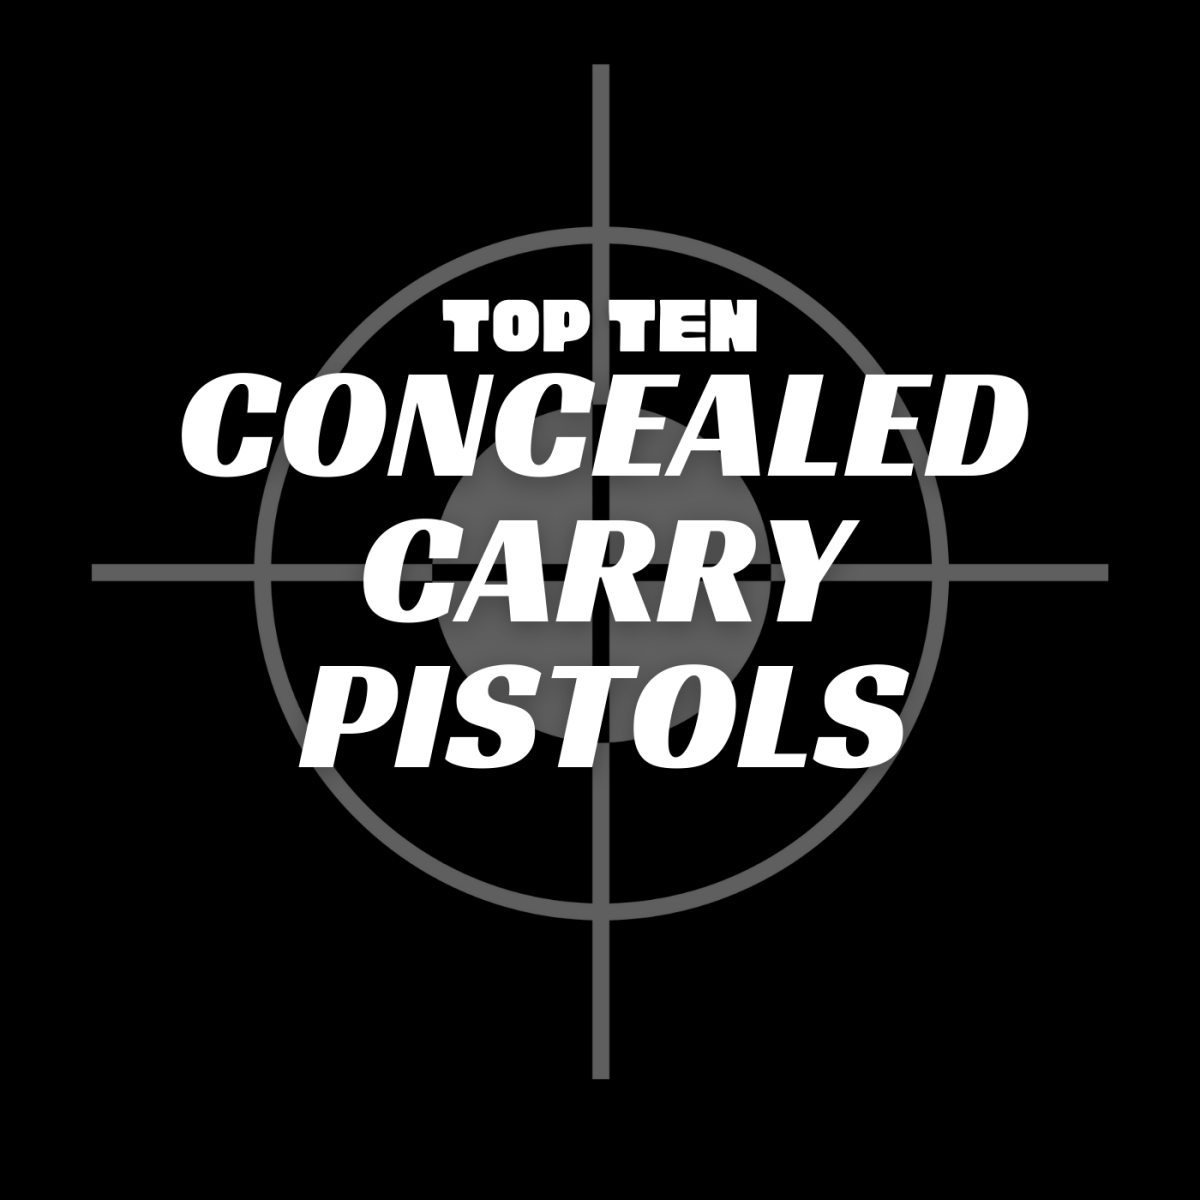 Top 10 concealed carry pistols